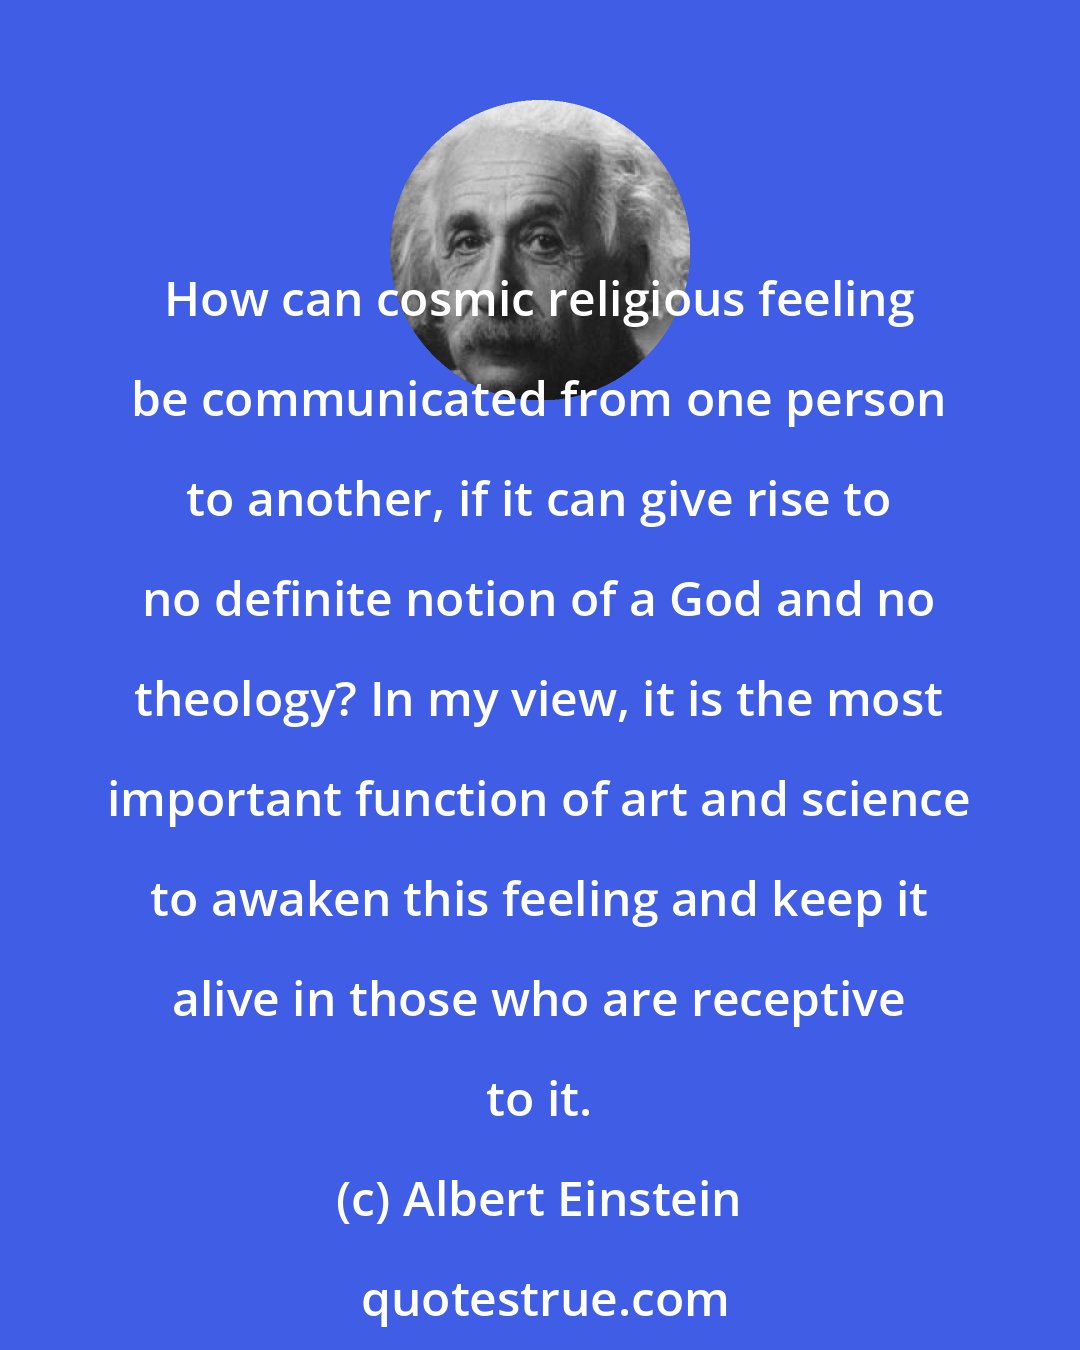 Albert Einstein: How can cosmic religious feeling be communicated from one person to another, if it can give rise to no definite notion of a God and no theology? In my view, it is the most important function of art and science to awaken this feeling and keep it alive in those who are receptive to it.